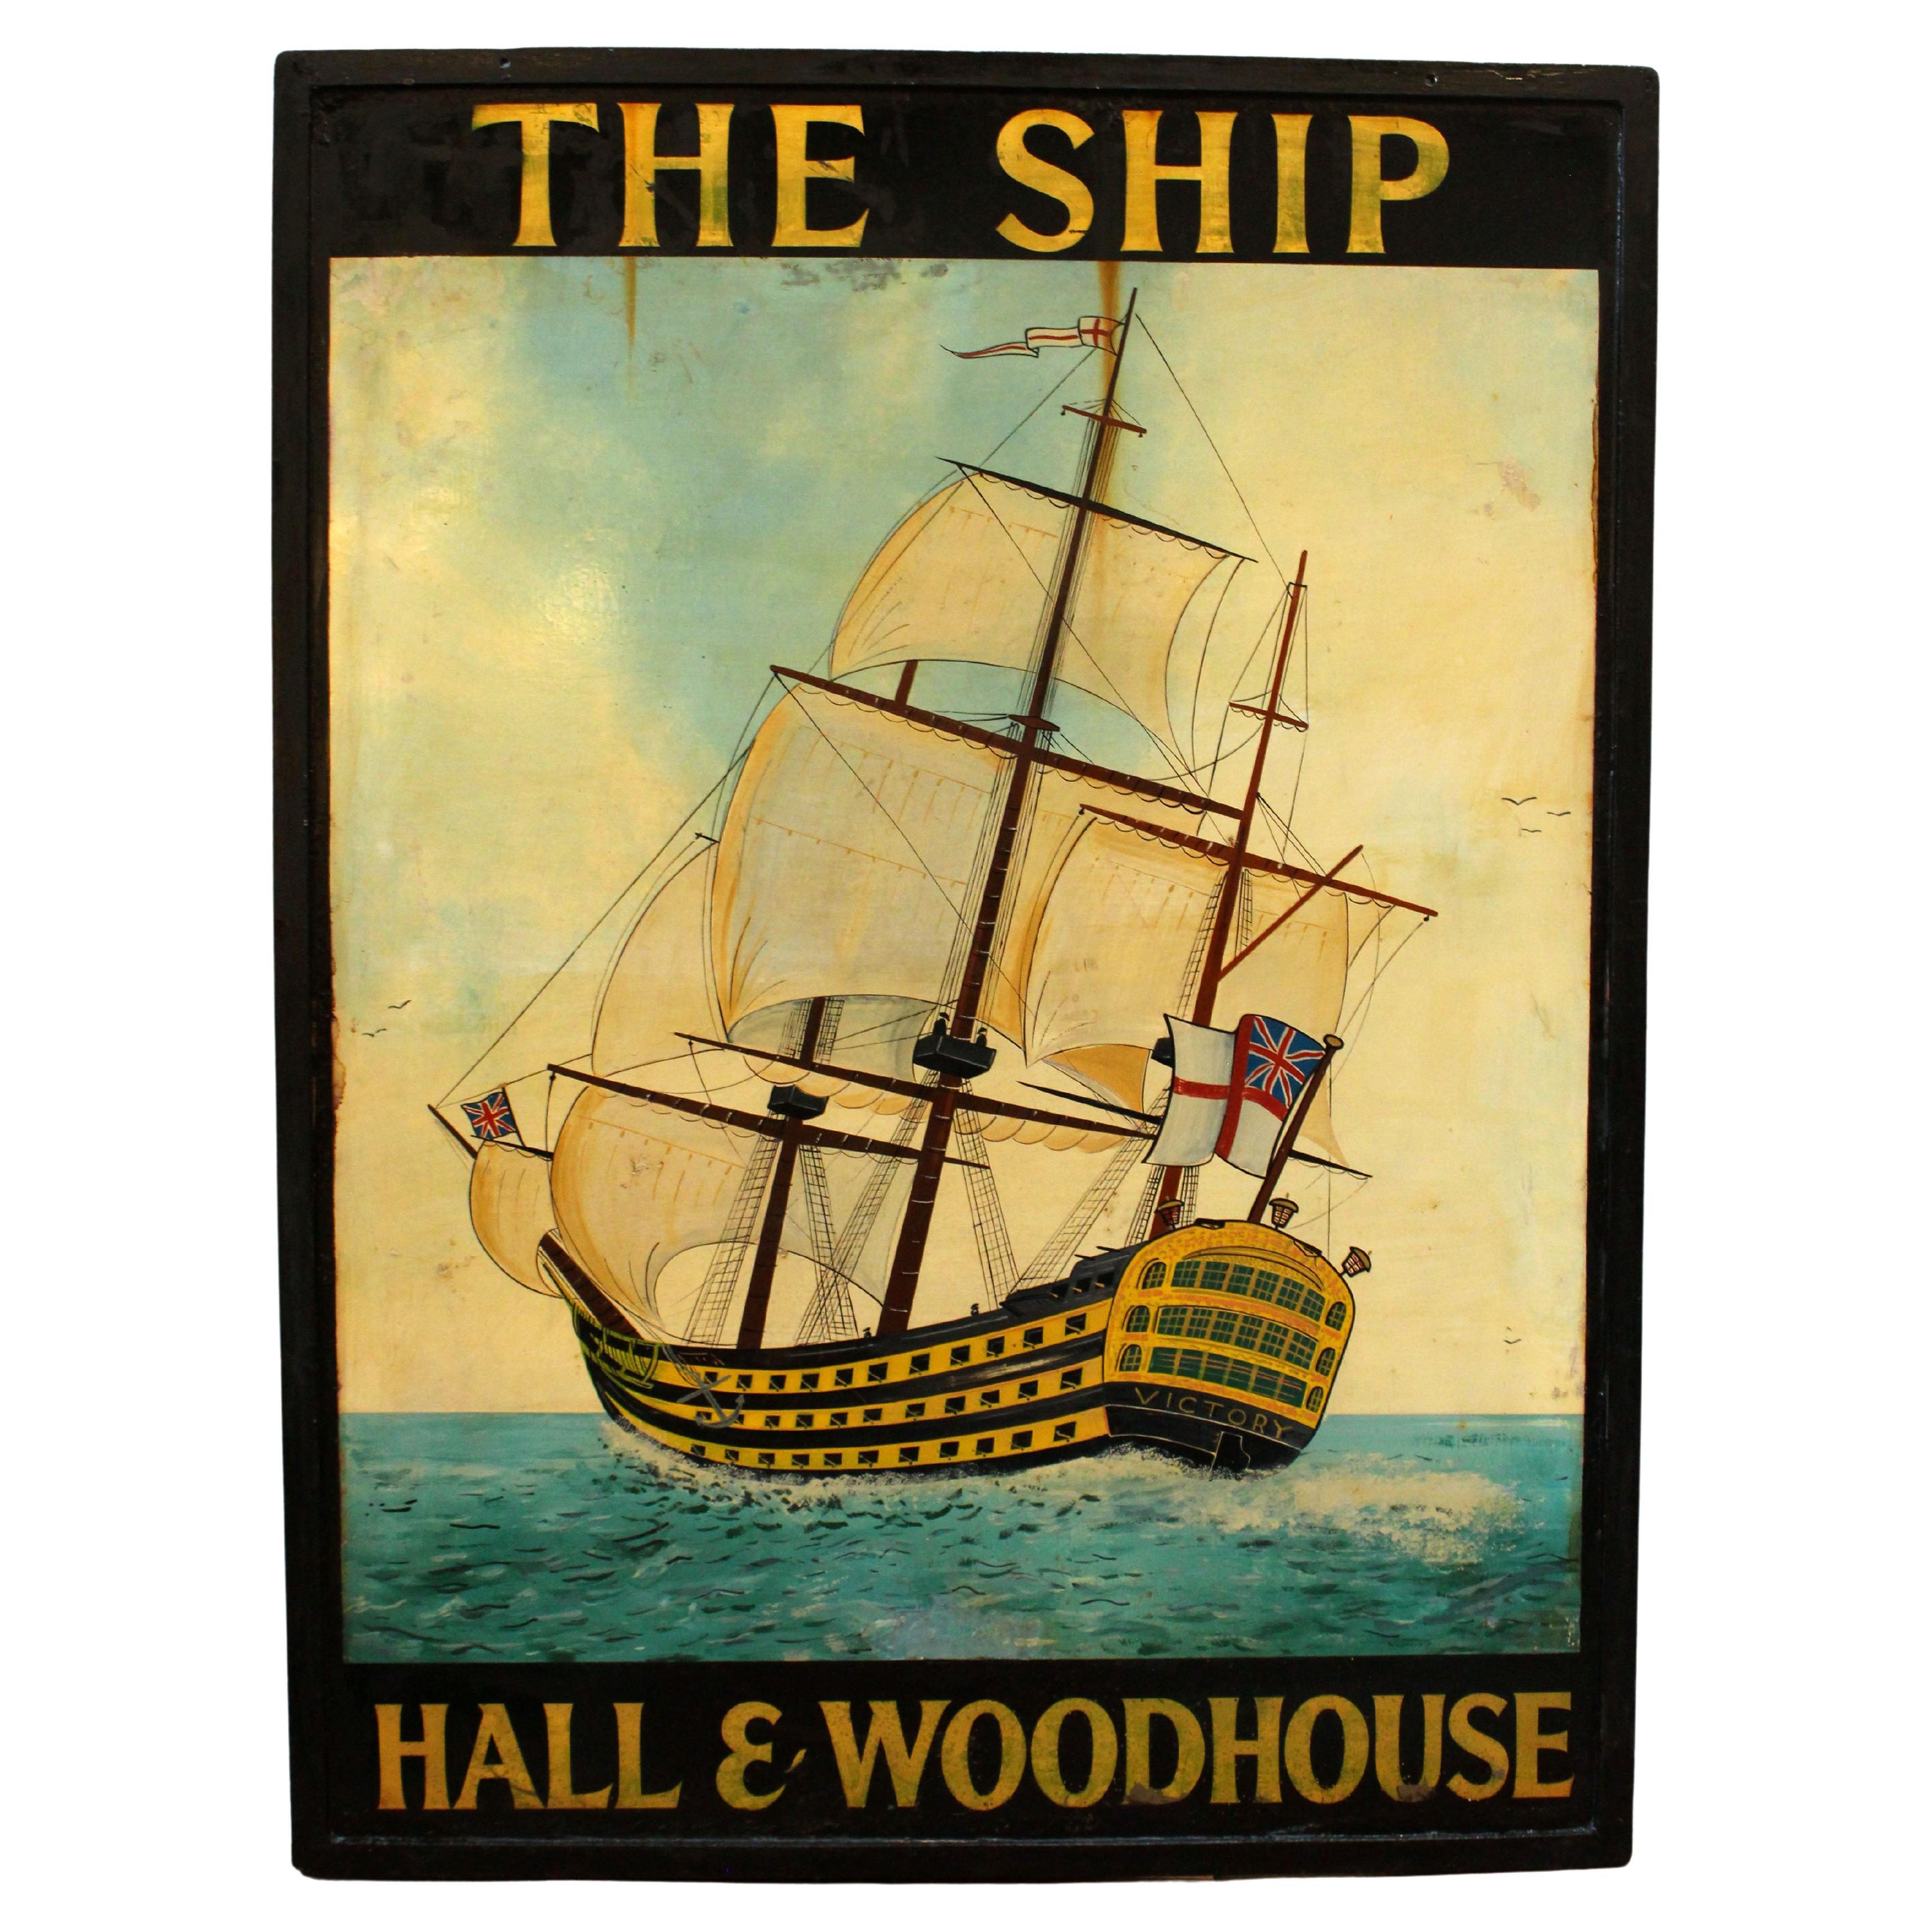 English Double-Sided Pub Sign for "The Ship"